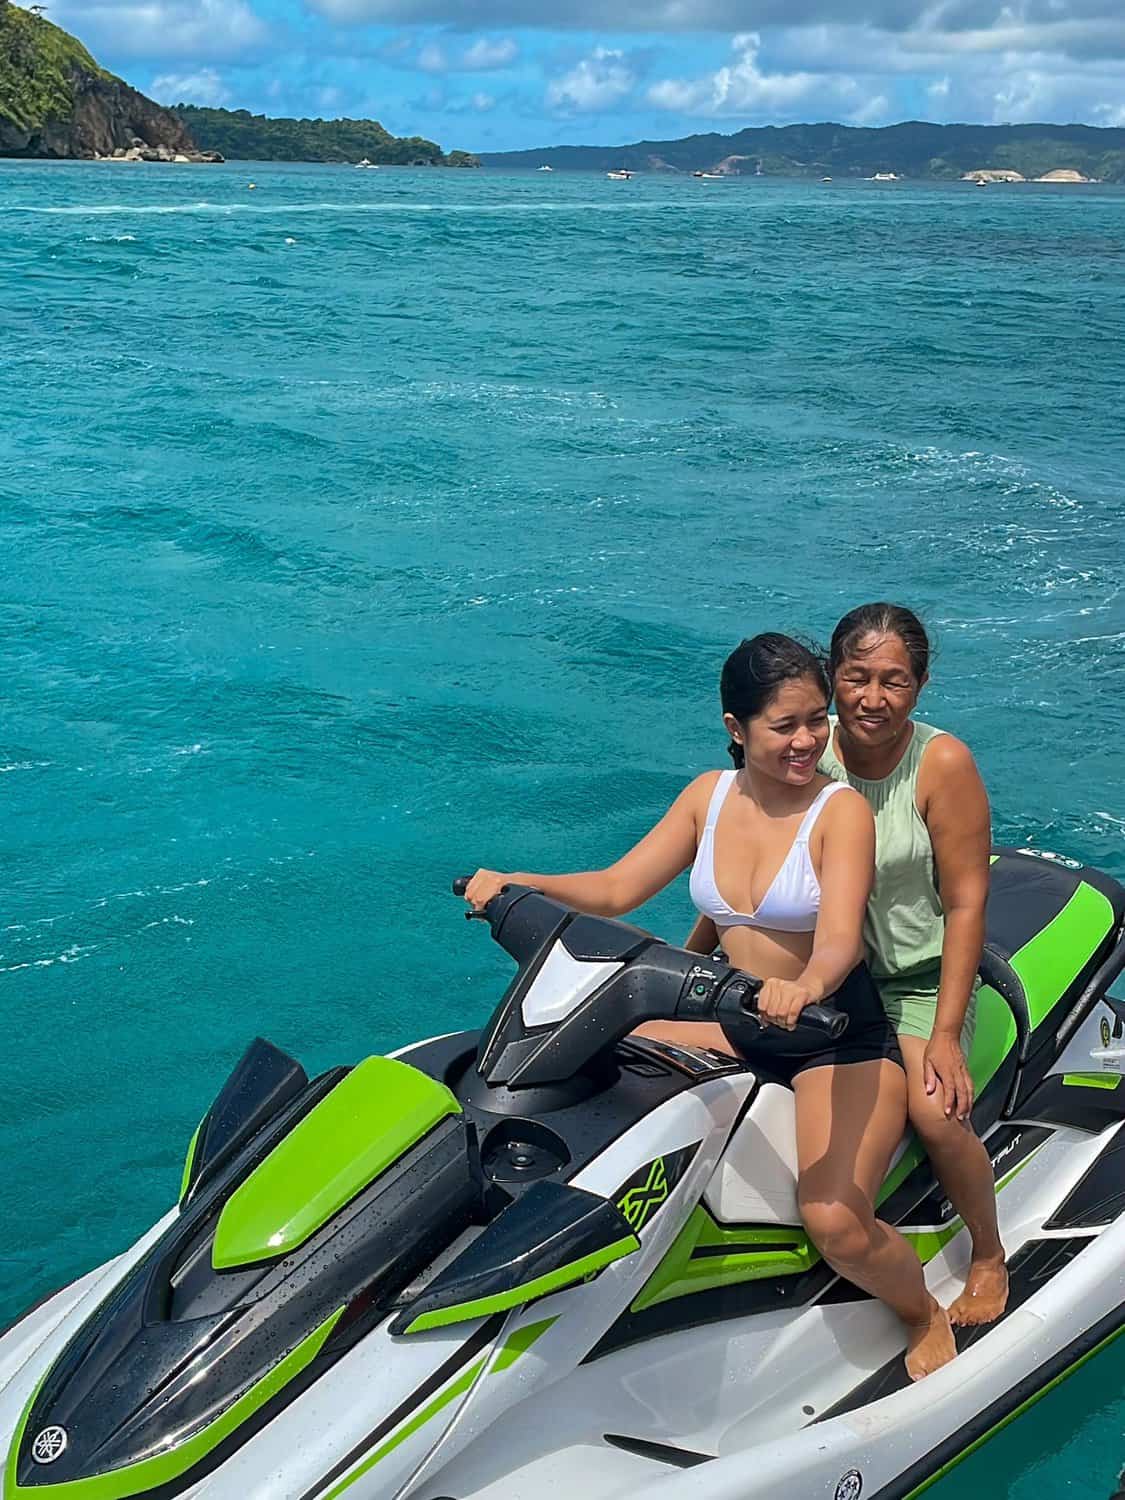 My mother and I on a jet ski in Boracay.